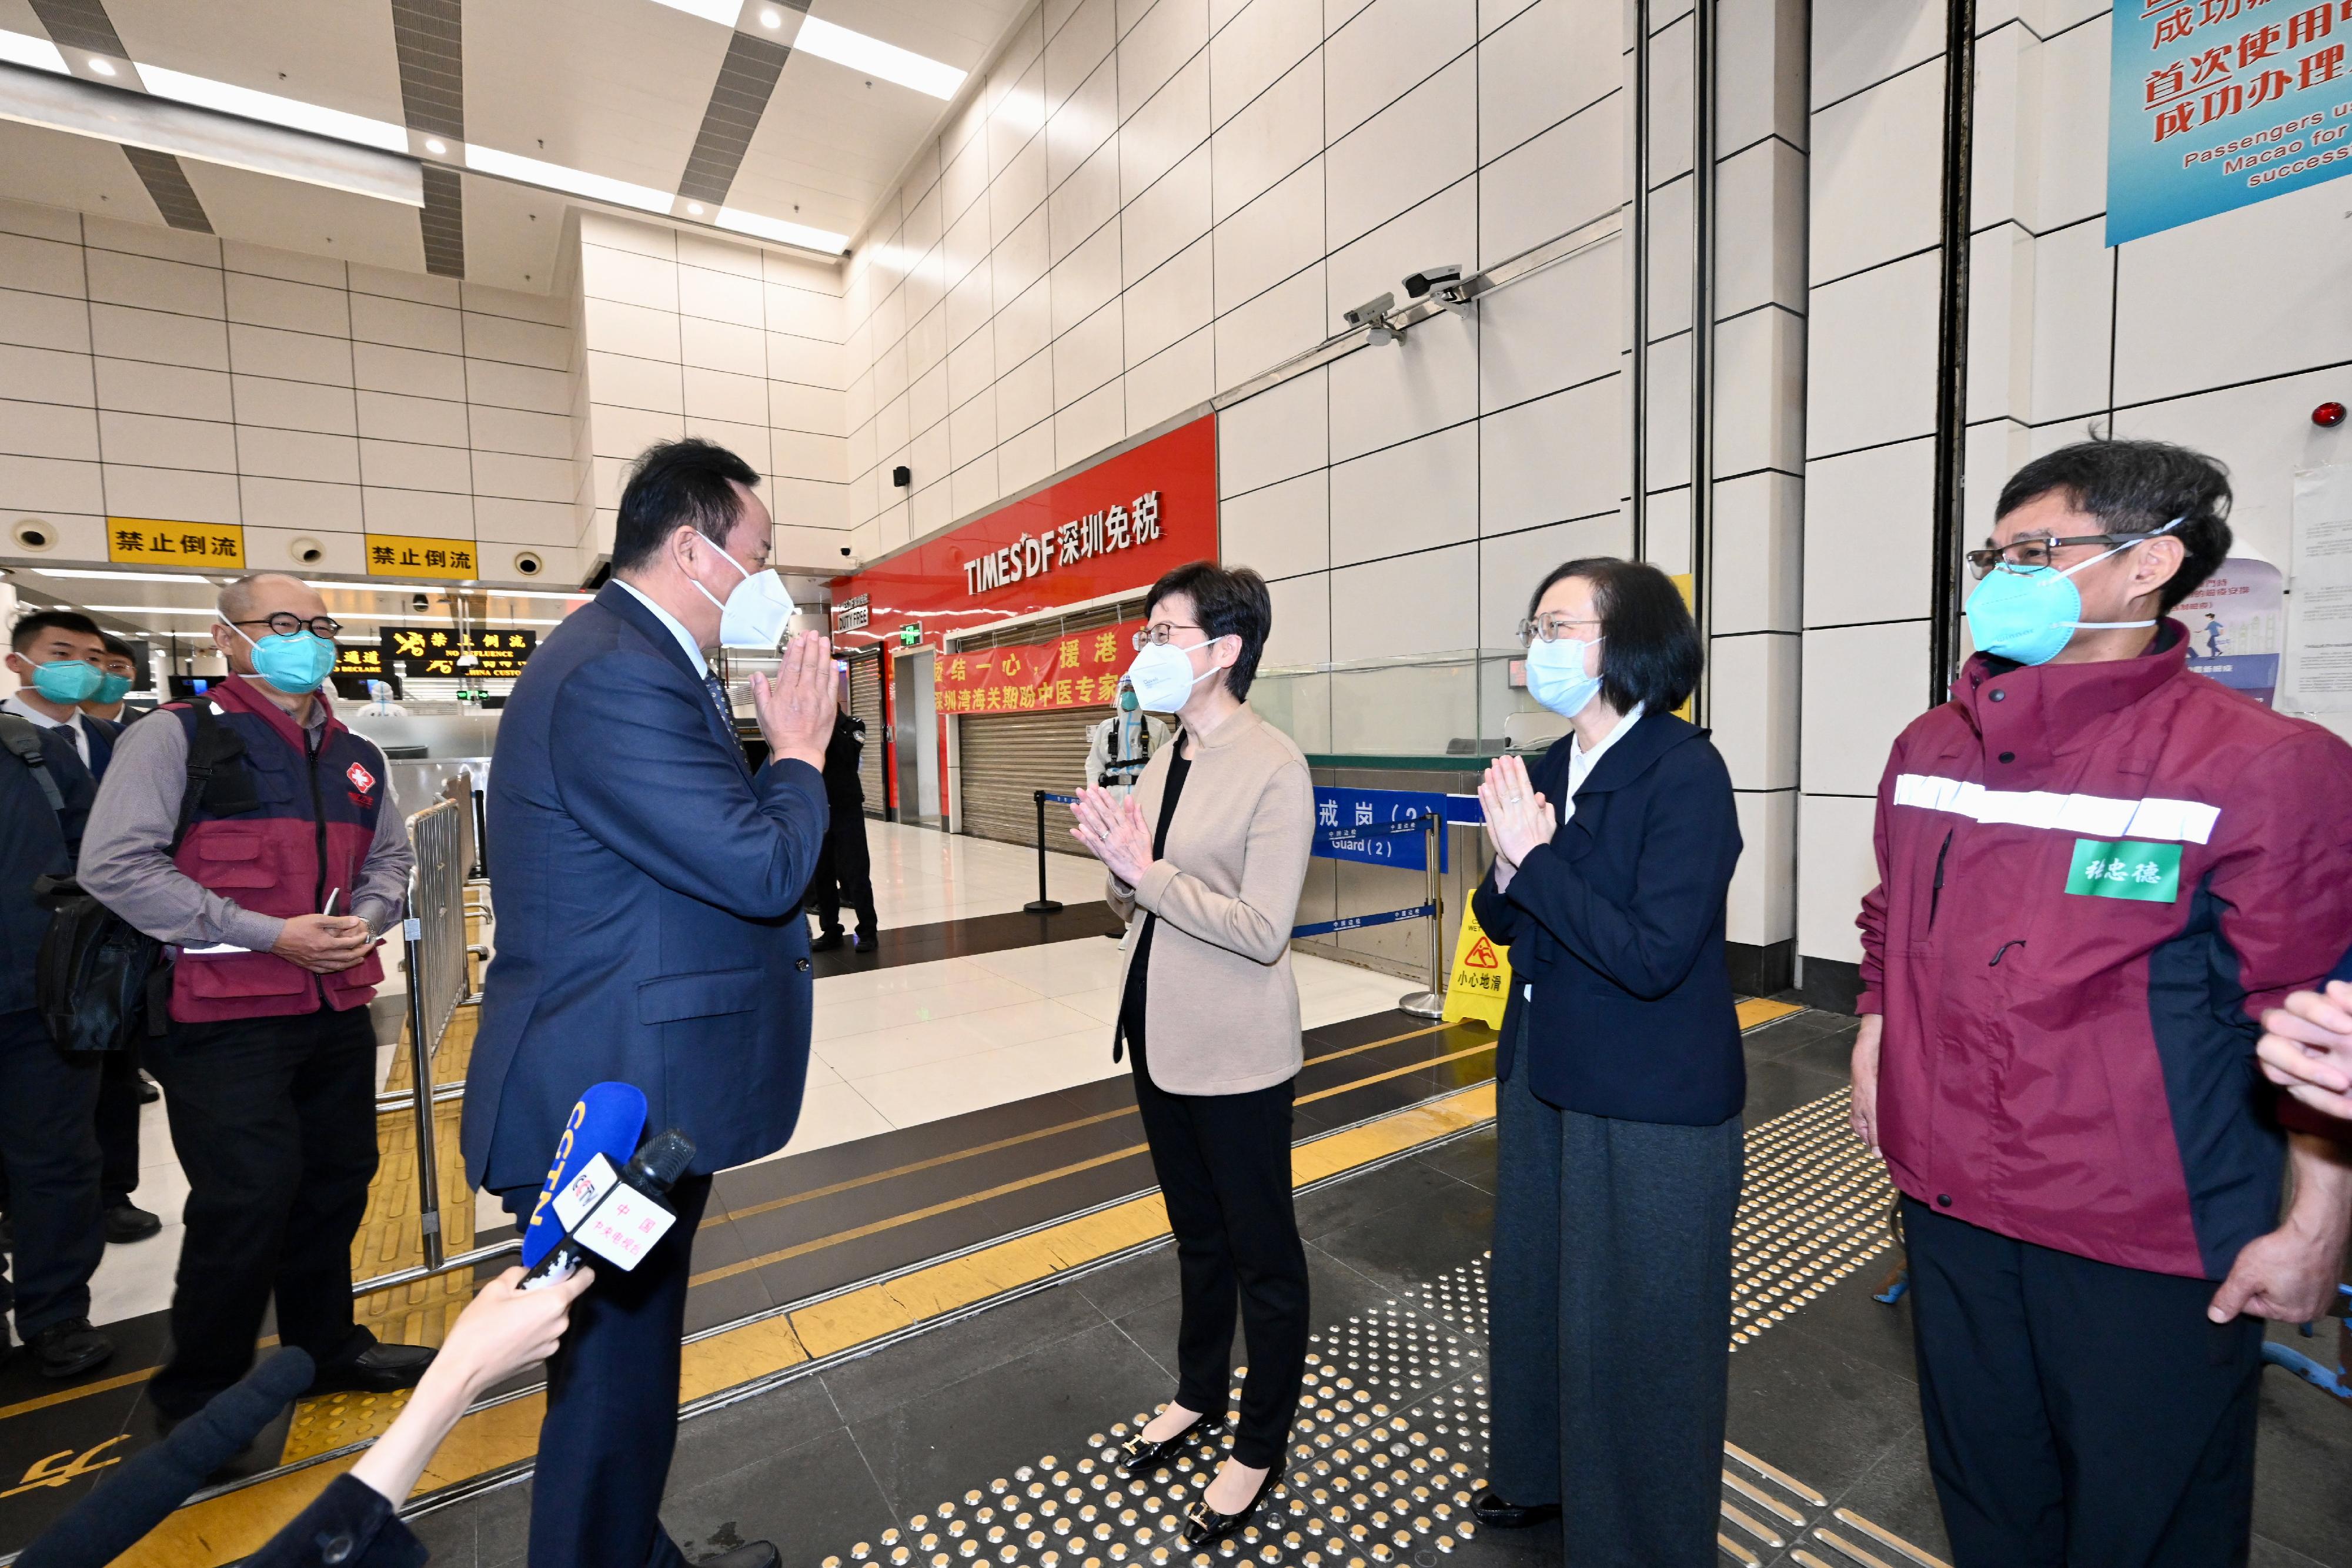 The Chief Executive, Mrs Carrie Lam, welcomed the Chinese medicine expert group at the Shenzhen Bay Port today (March 29). The experts were arranged by the Central Authorities to support the anti-epidemic work in Hong Kong. Photo shows Mrs Lam (third right) chatting with the group leader, academician of the Chinese Academy of Sciences Mr Tong Xiaolin (fourth right). Looking on are the Secretary for Food and Health, Professor Sophia Chan (second right), and the Vice-president of the Guangdong Provincial Hospital of Traditional Chinese Medicine, Mr Zhang Zhongde (first right).